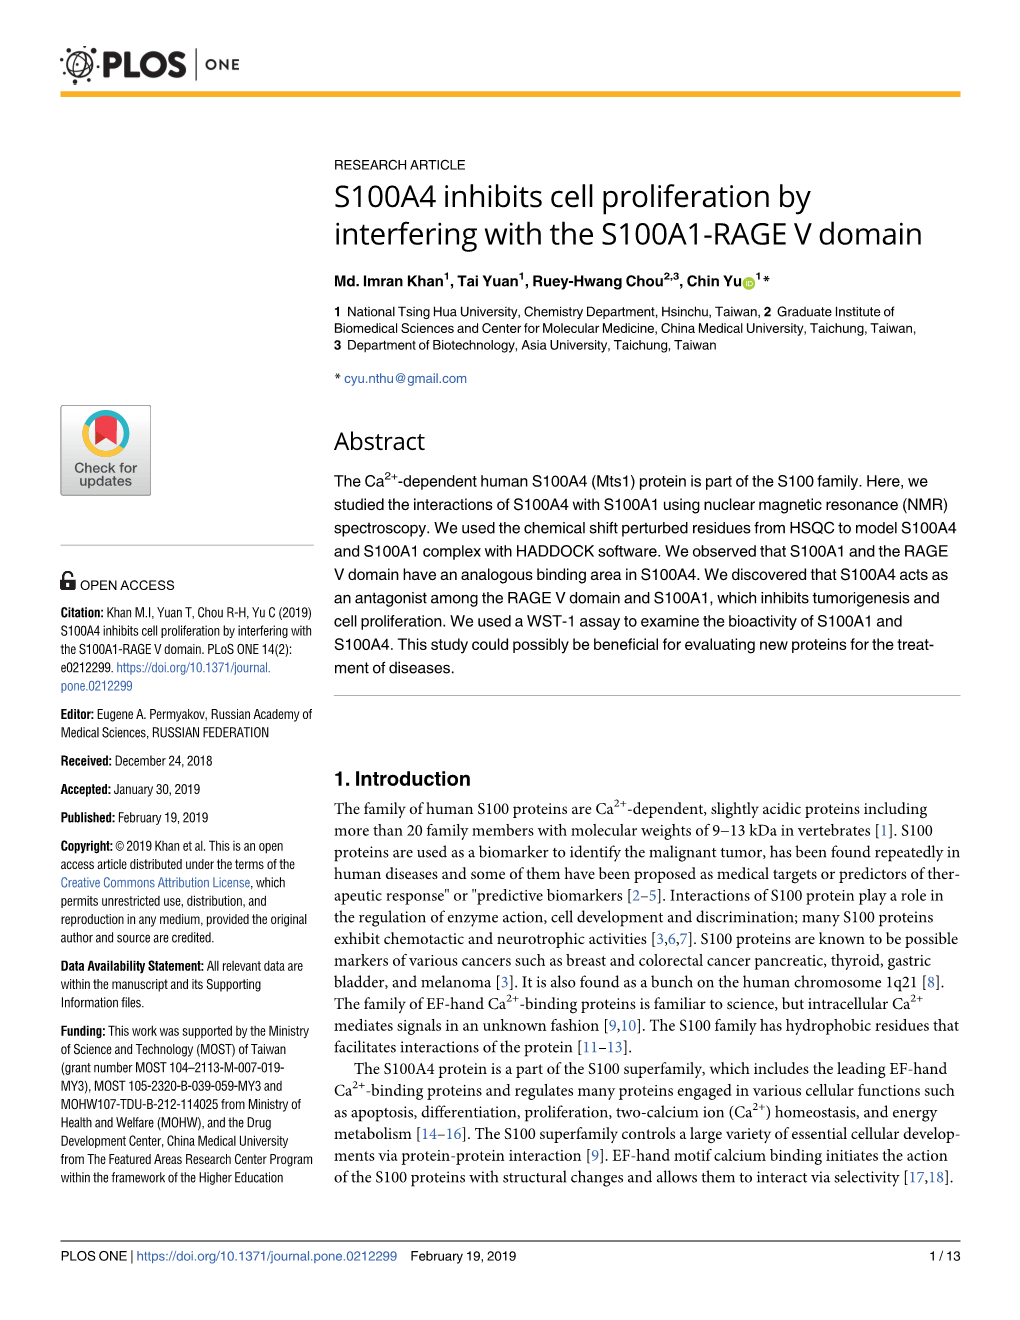 S100A4 Inhibits Cell Proliferation by Interfering with the S100A1-RAGE V Domain